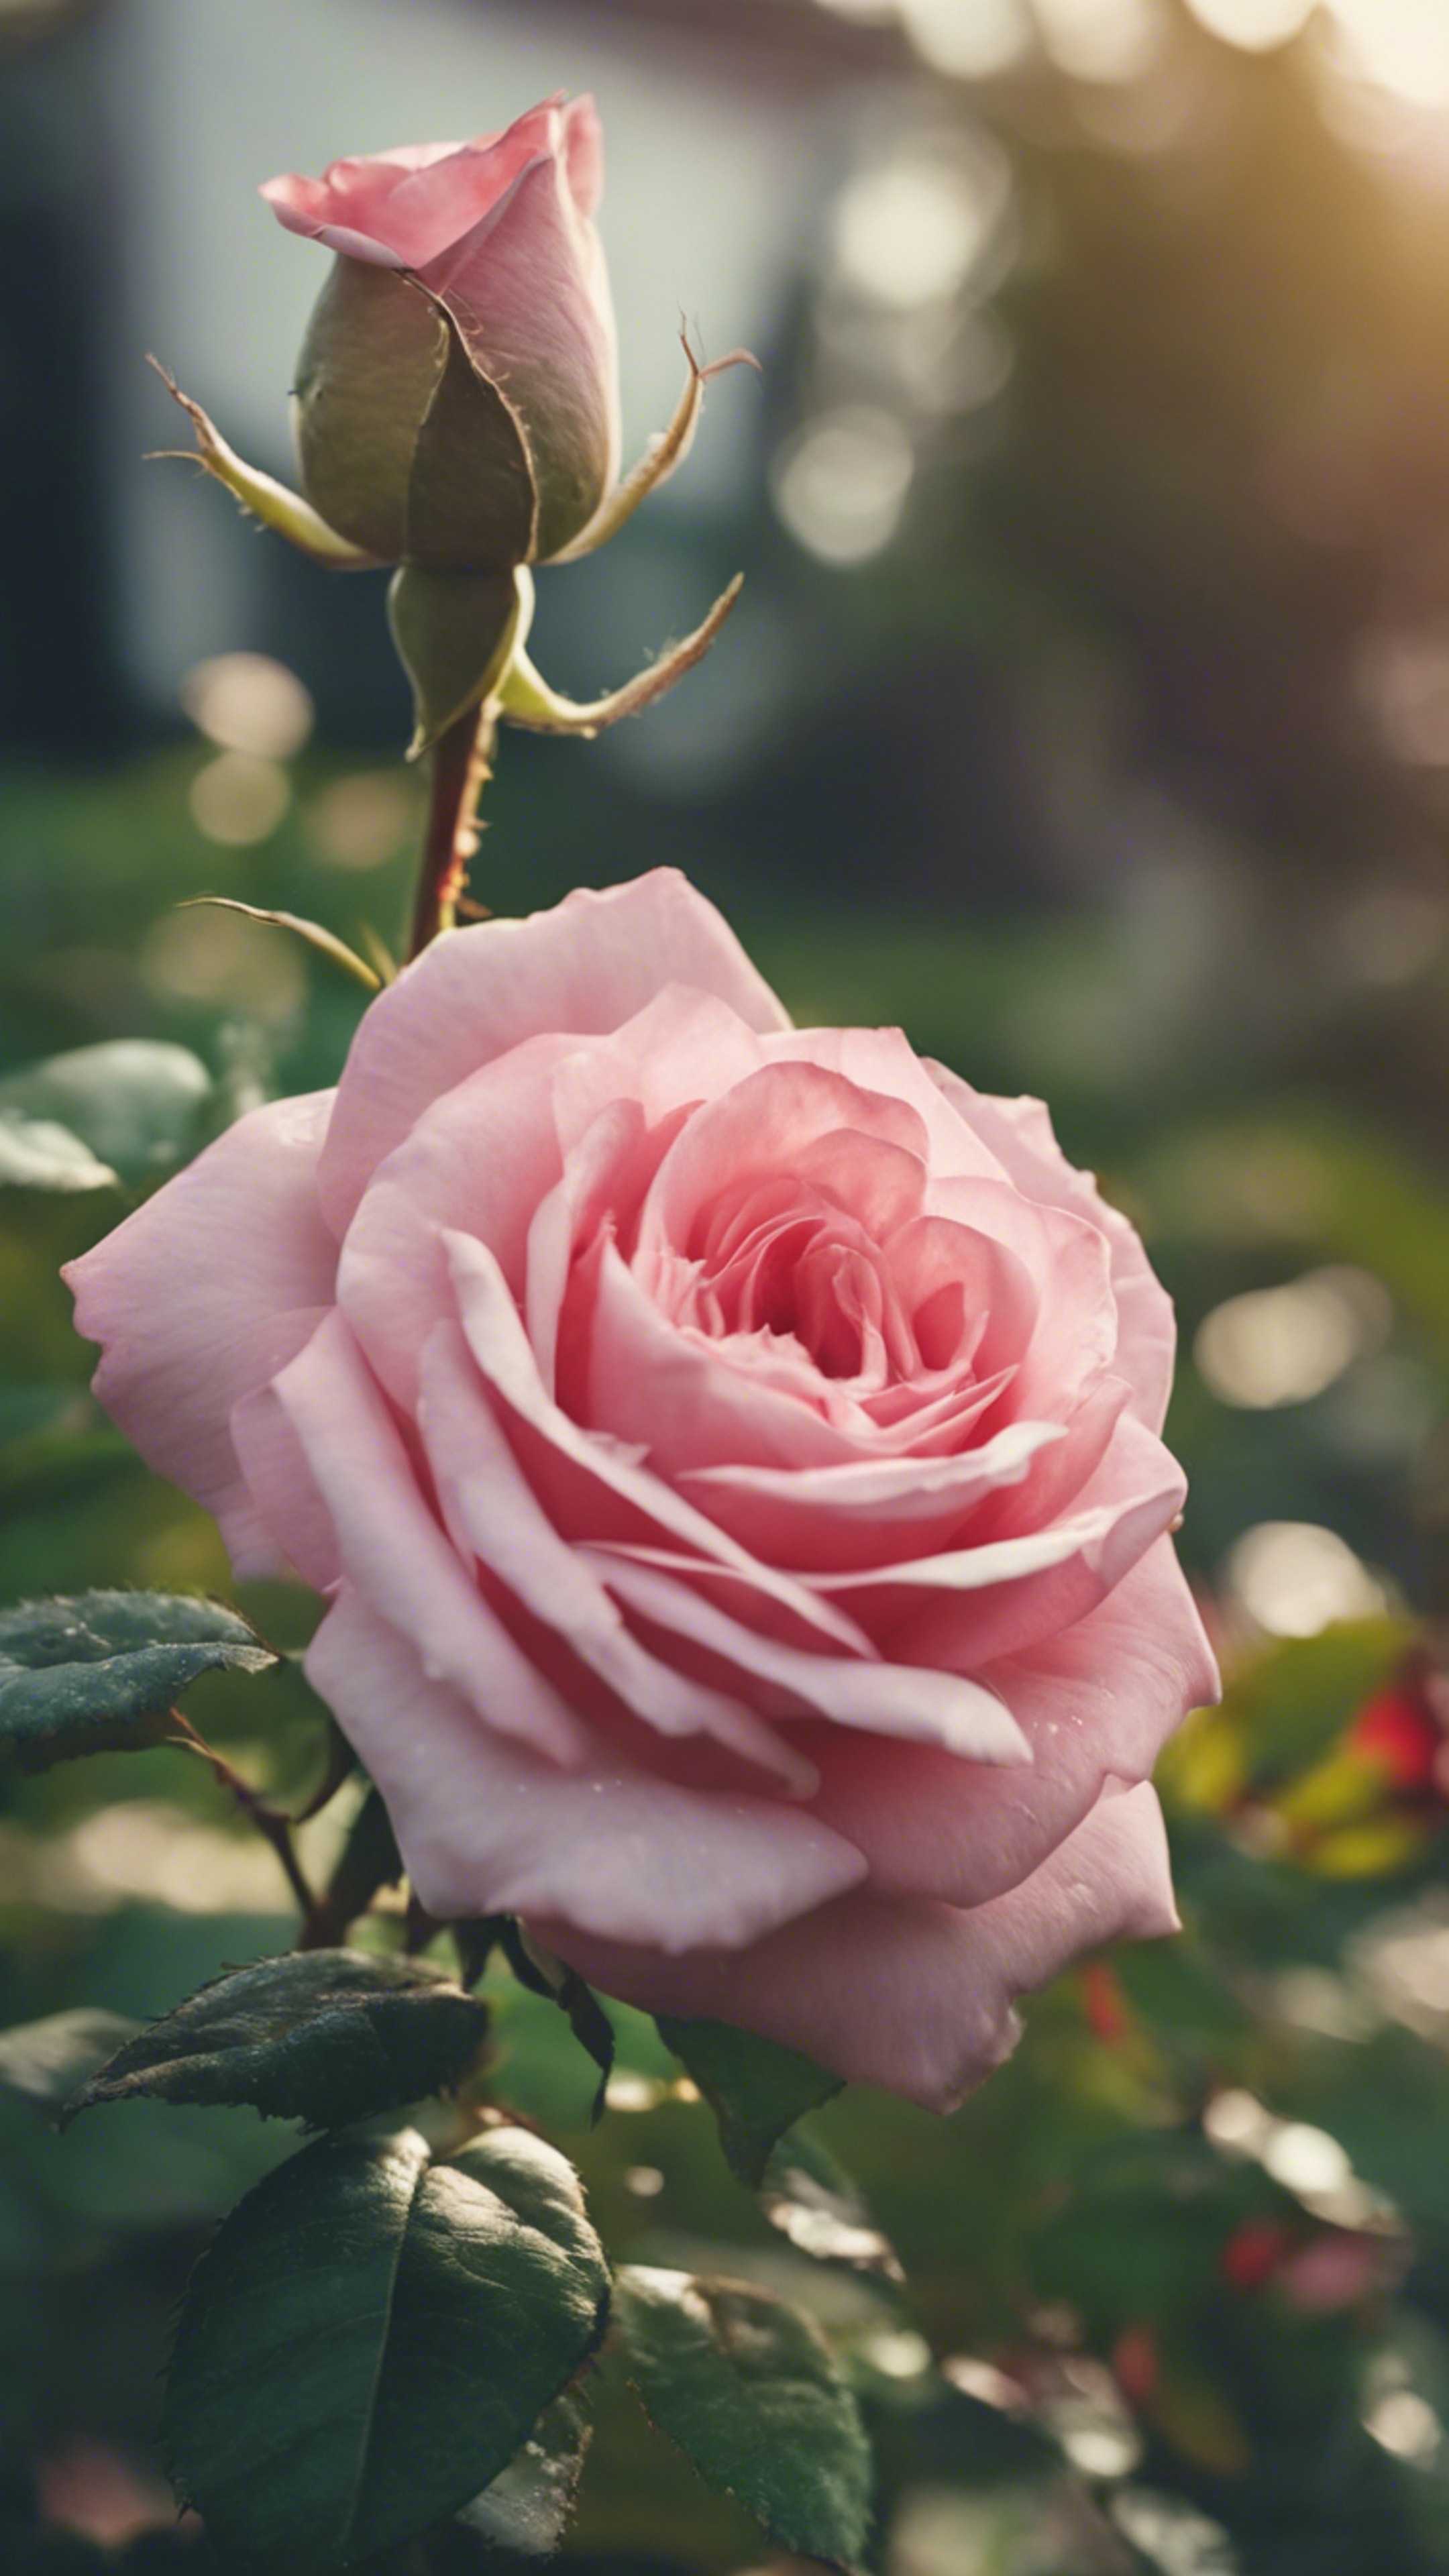 A beautiful pink heart-shaped rose blooming in a lush green garden. 牆紙[602cae484ee541a8ab0b]